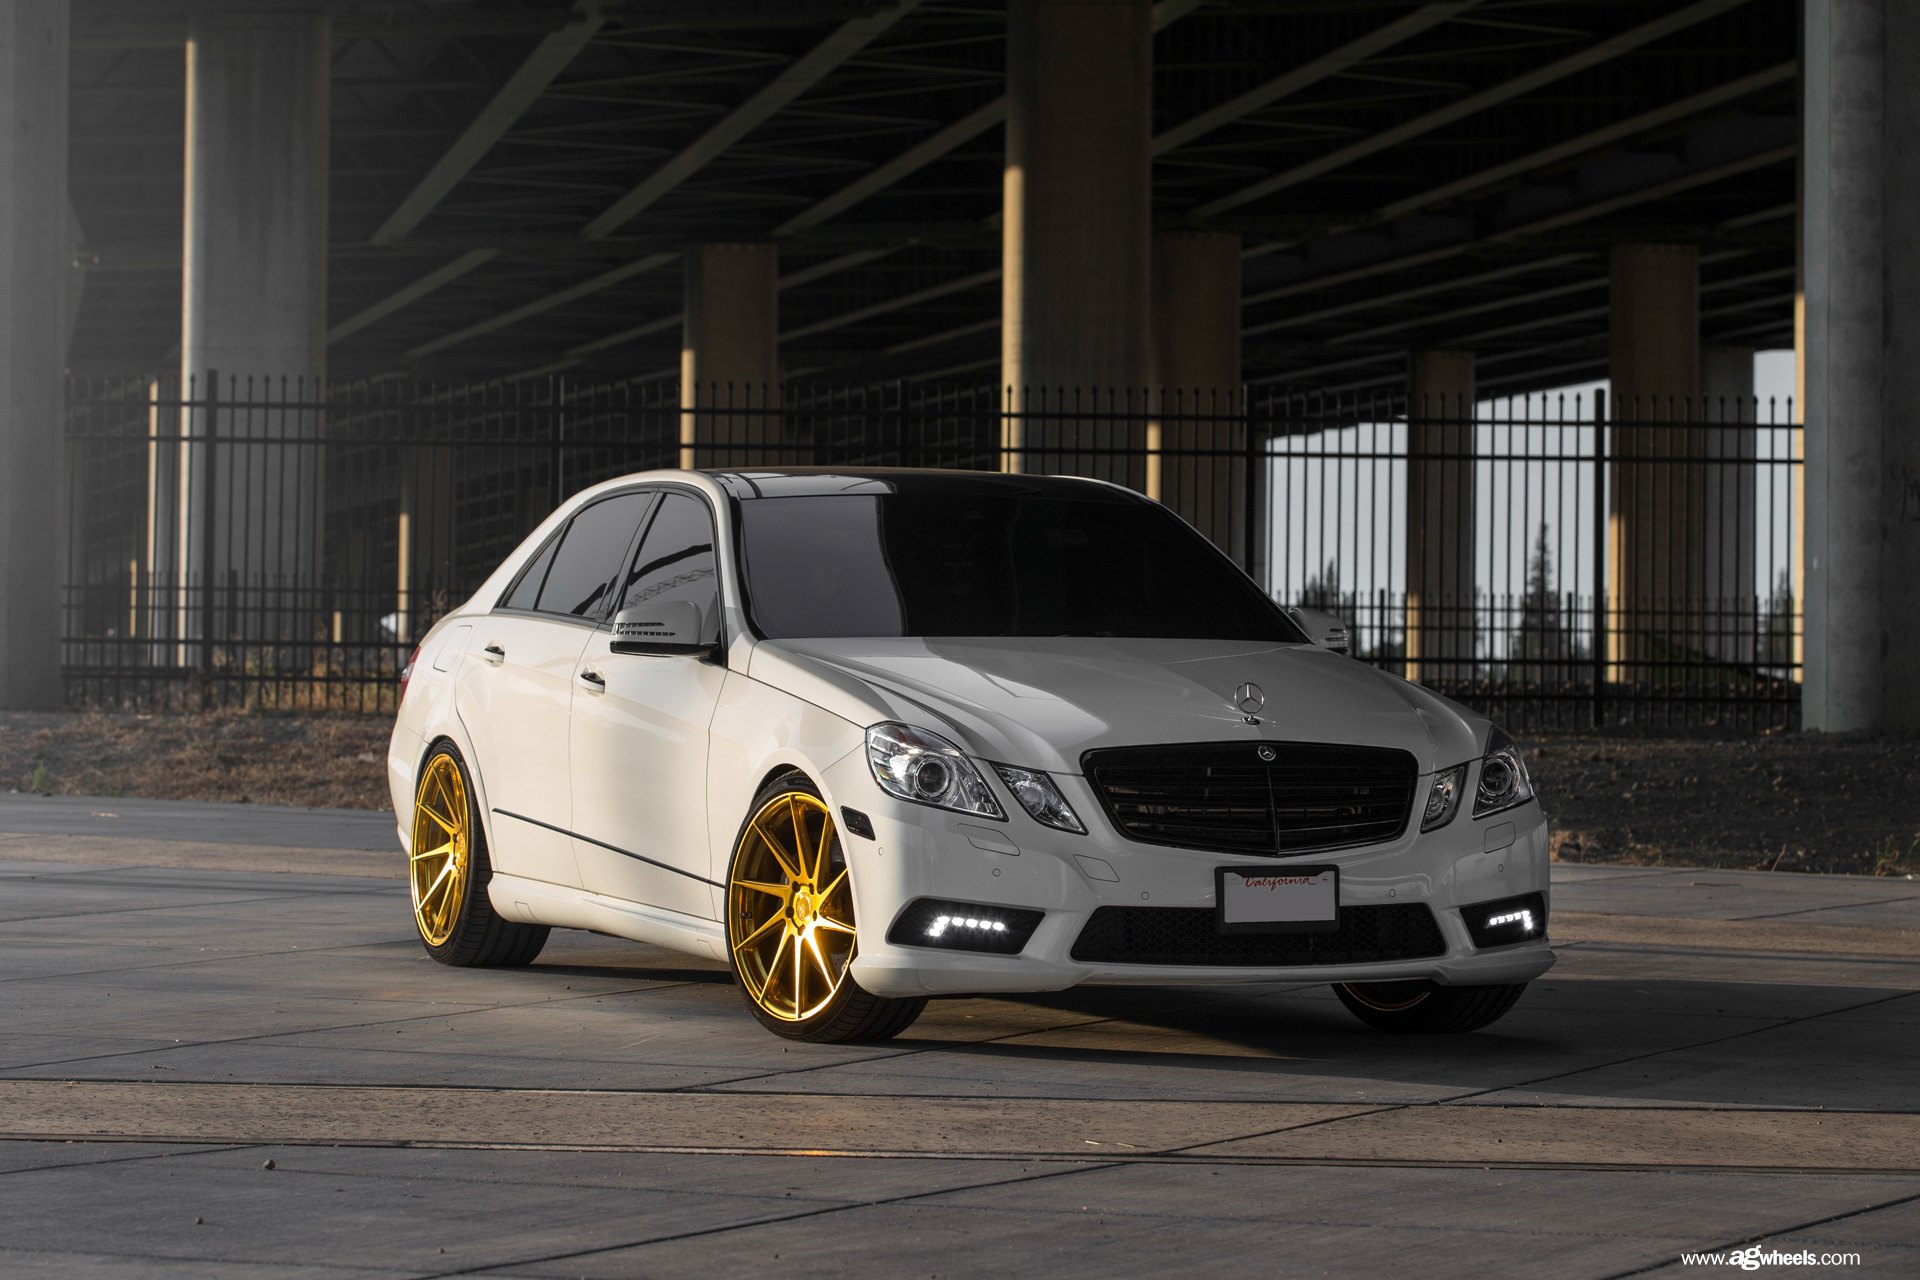 Blacked Out Grille on White Mercedes E-Class - Photo by Avant Garde Wheels